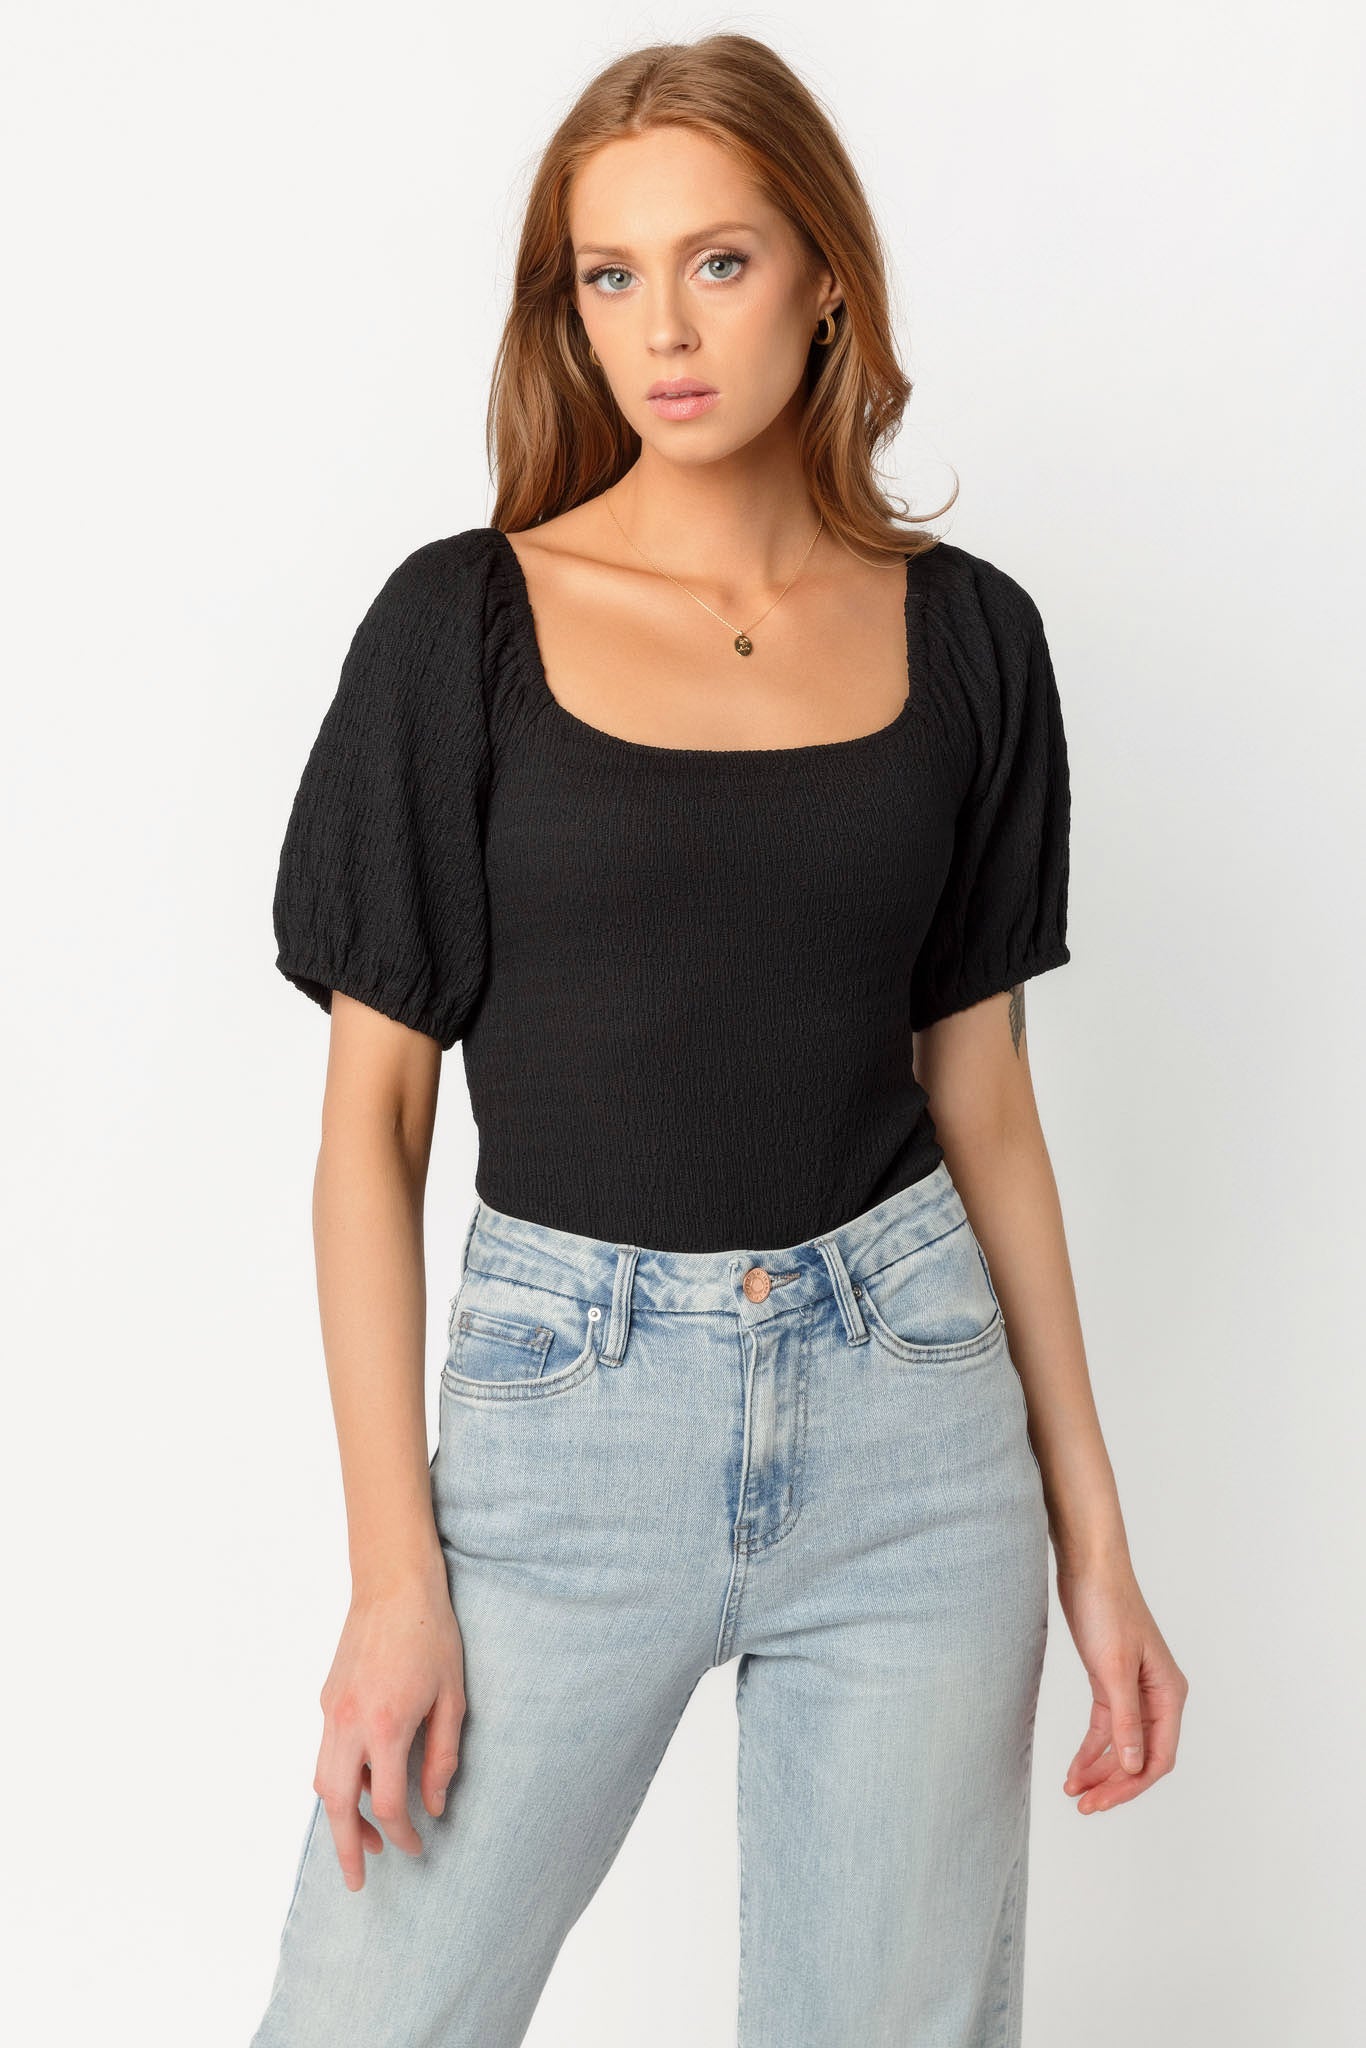 Textured Puff Sleeve Bodysuit with Tie-Back